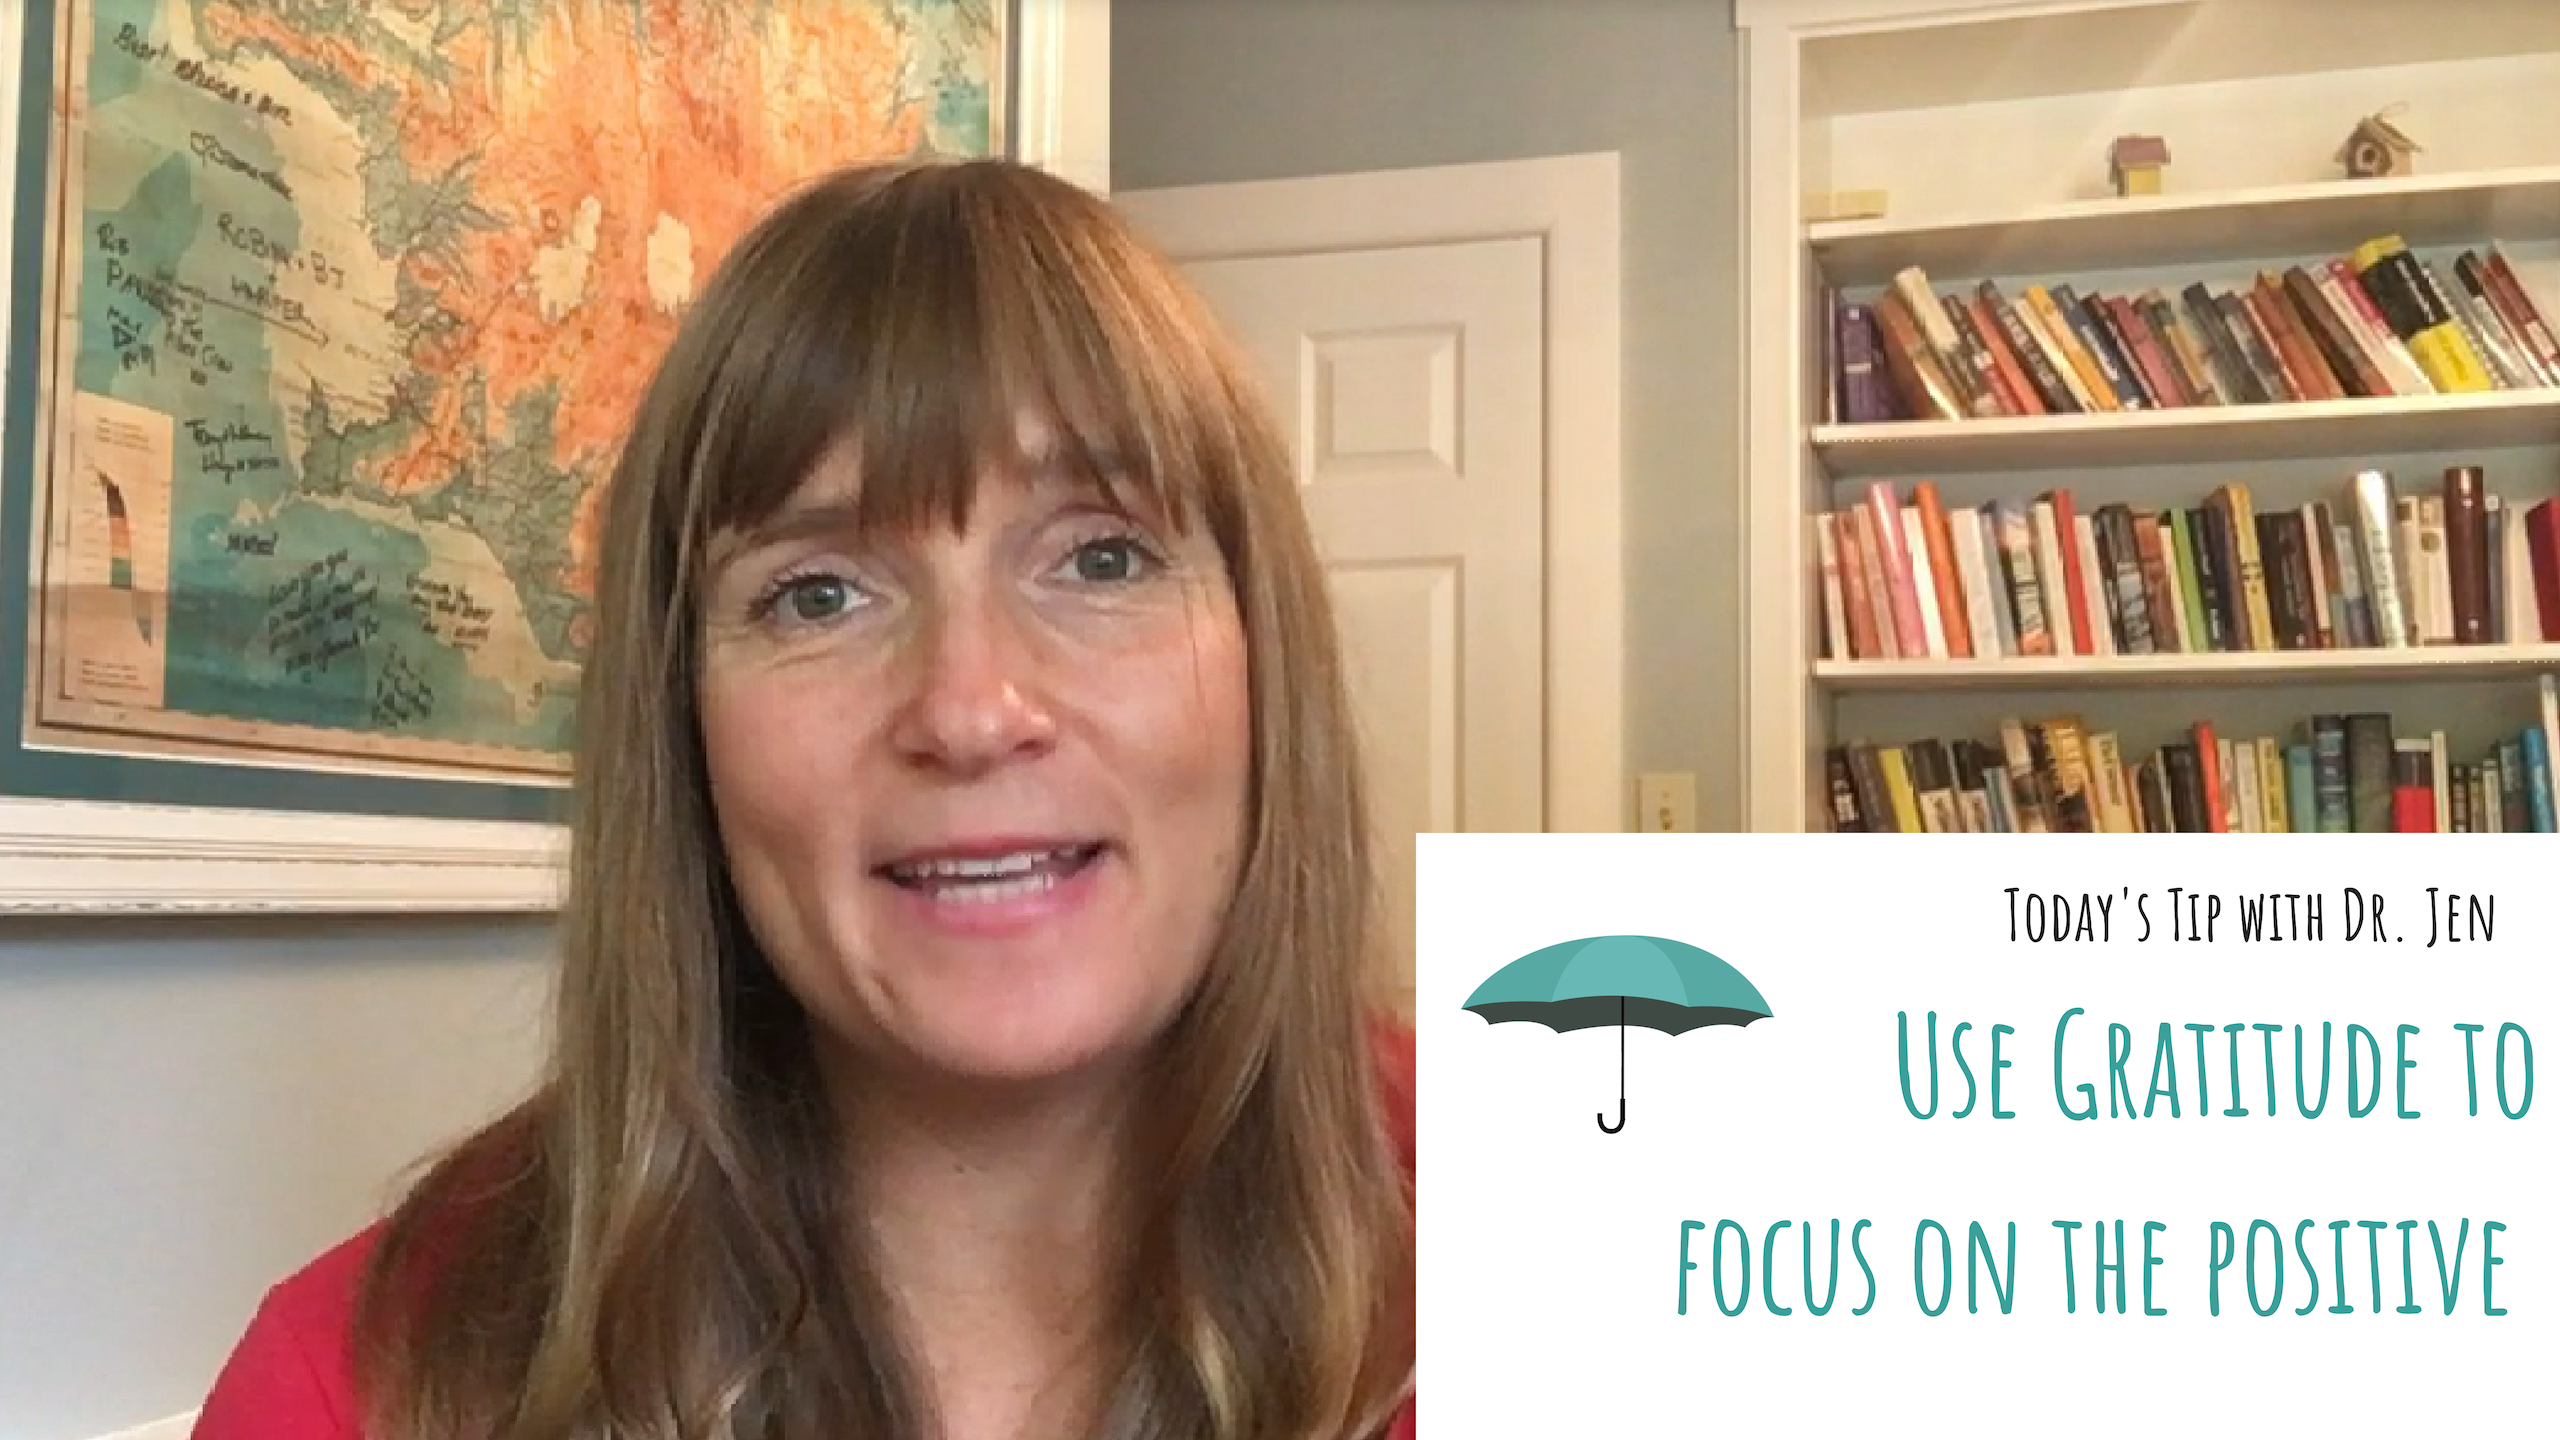 Today’s Tip with Dr. Jen: Use Gratitude to Focus on the Positive